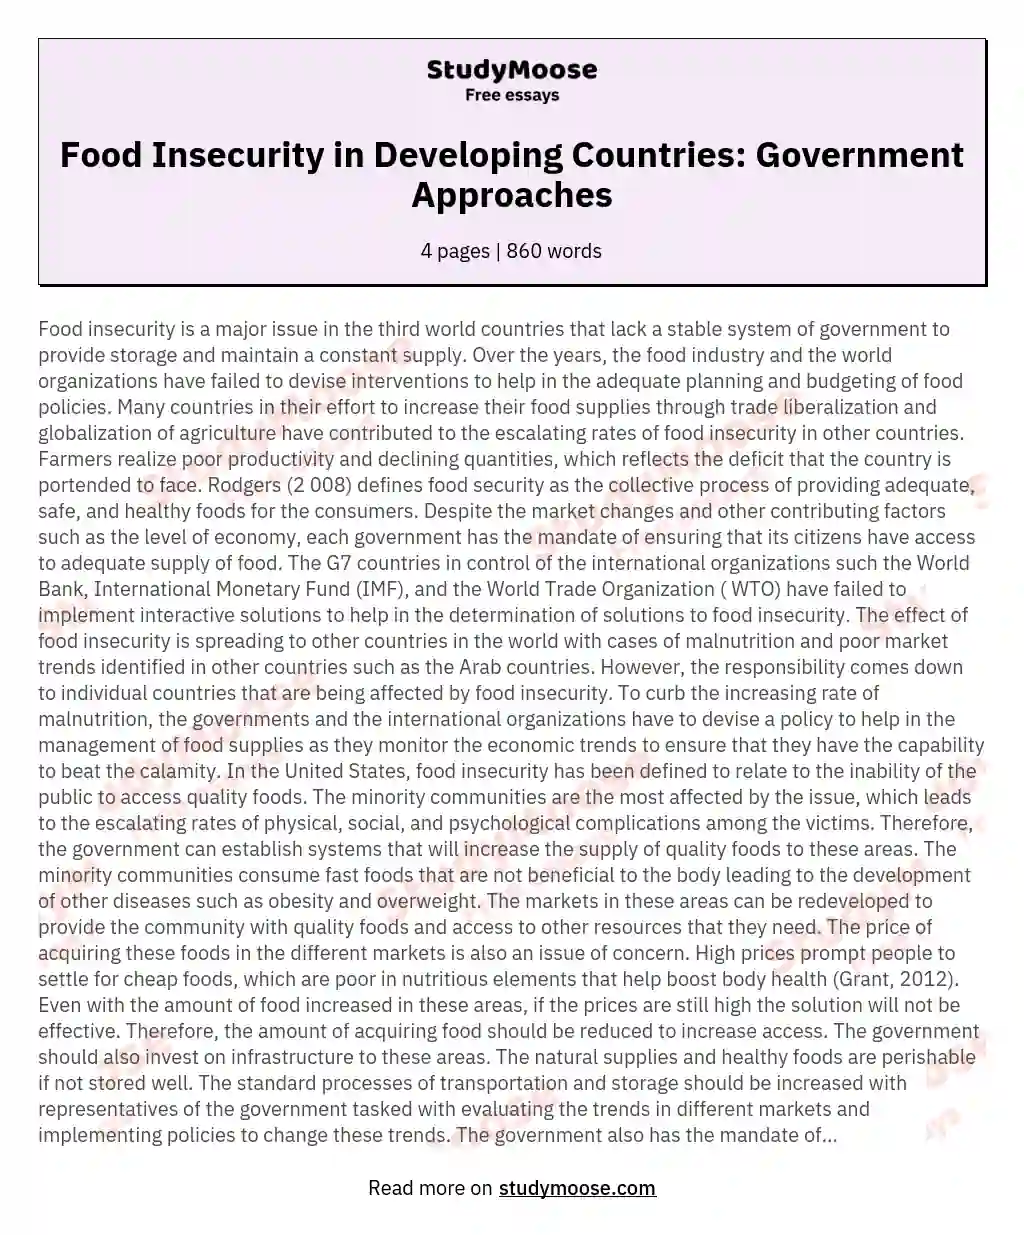 Food Insecurity in Developing Countries: Government Approaches essay